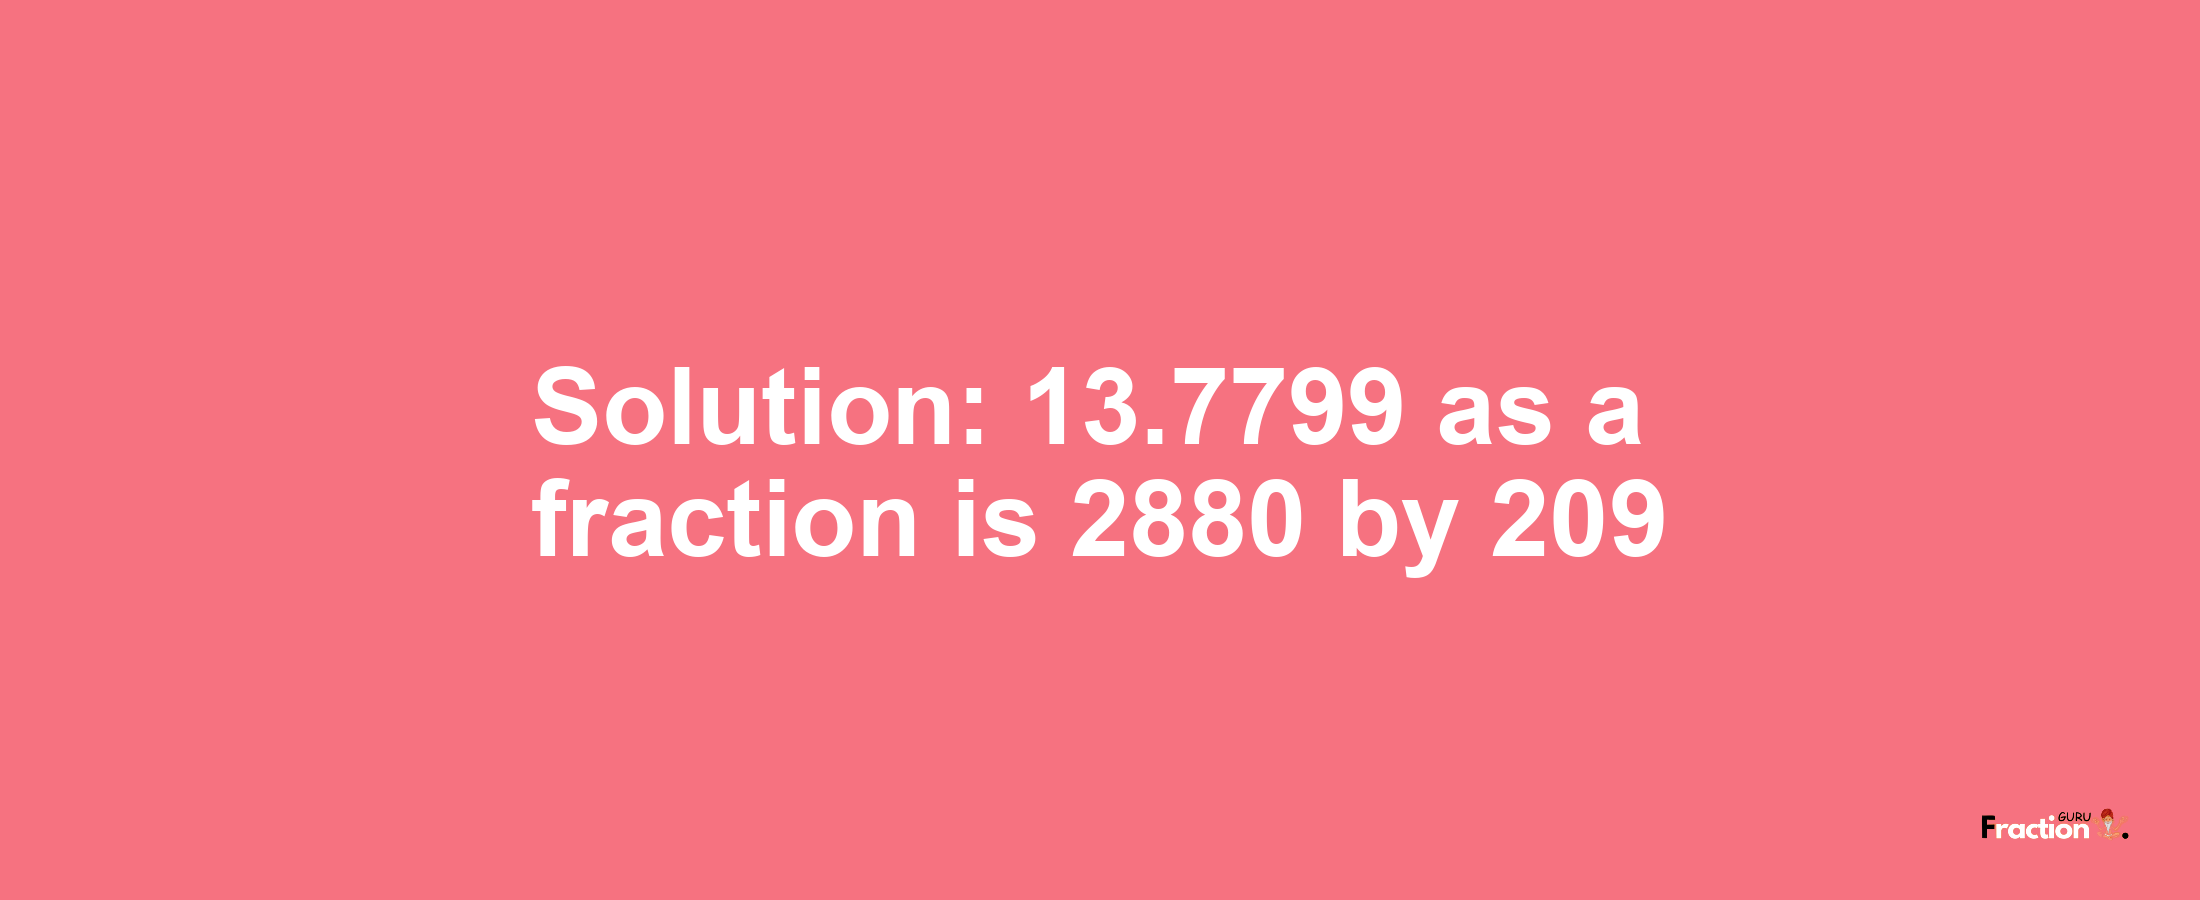 Solution:13.7799 as a fraction is 2880/209